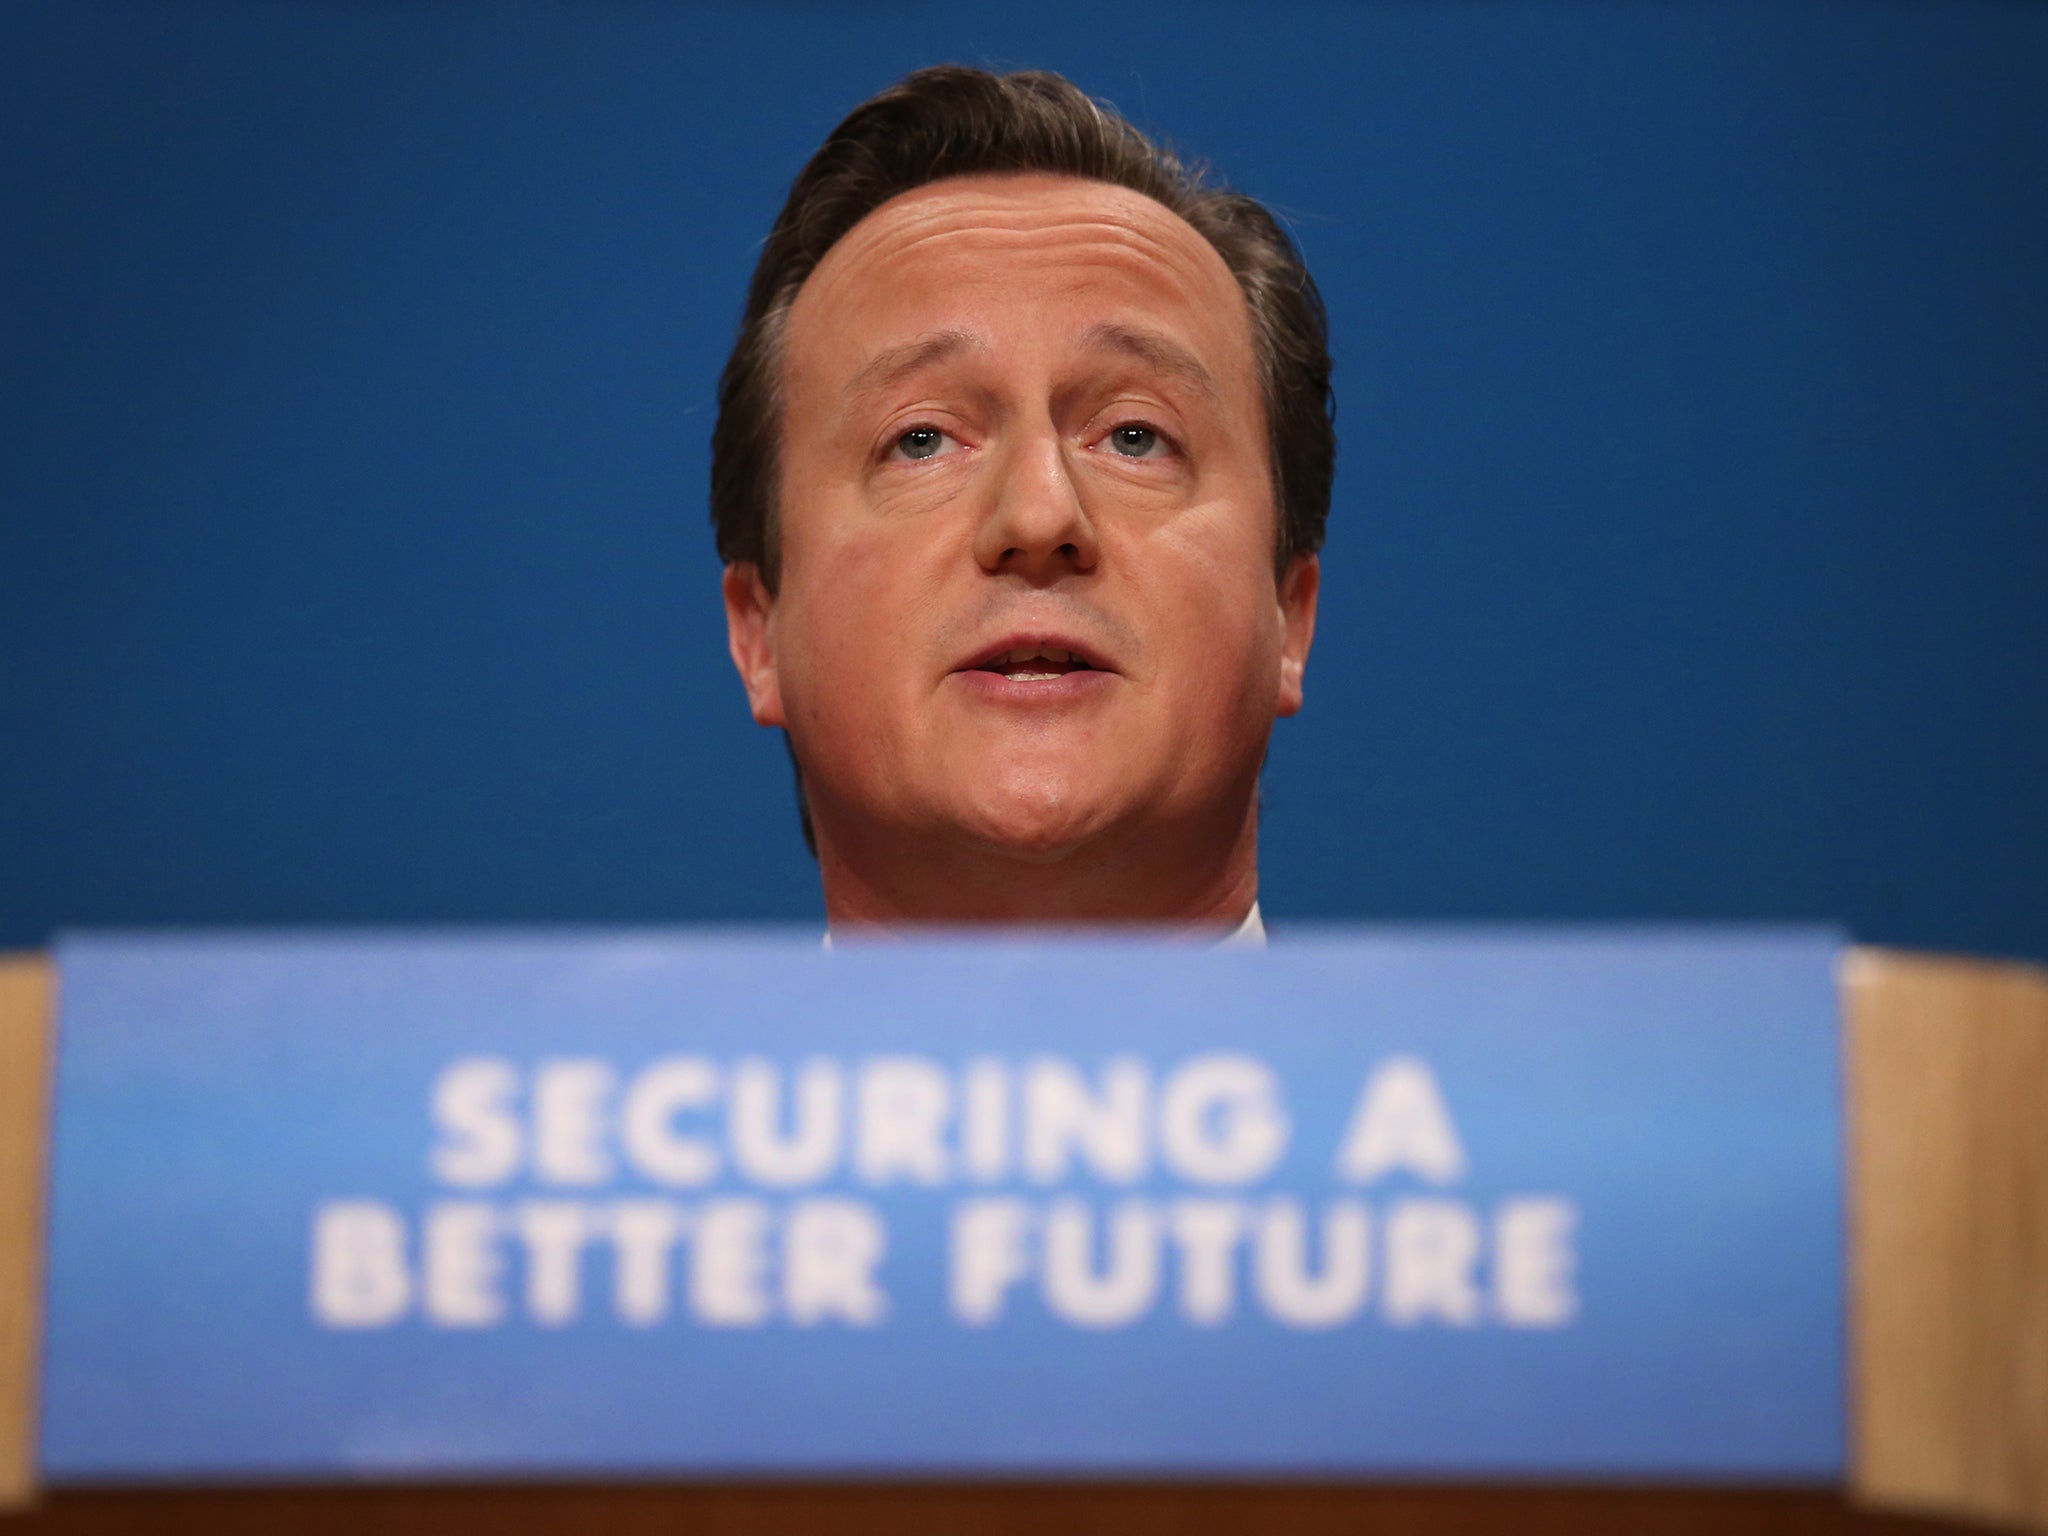 David Cameron gives his keynote speech to the Conservative party conference in Birmingham